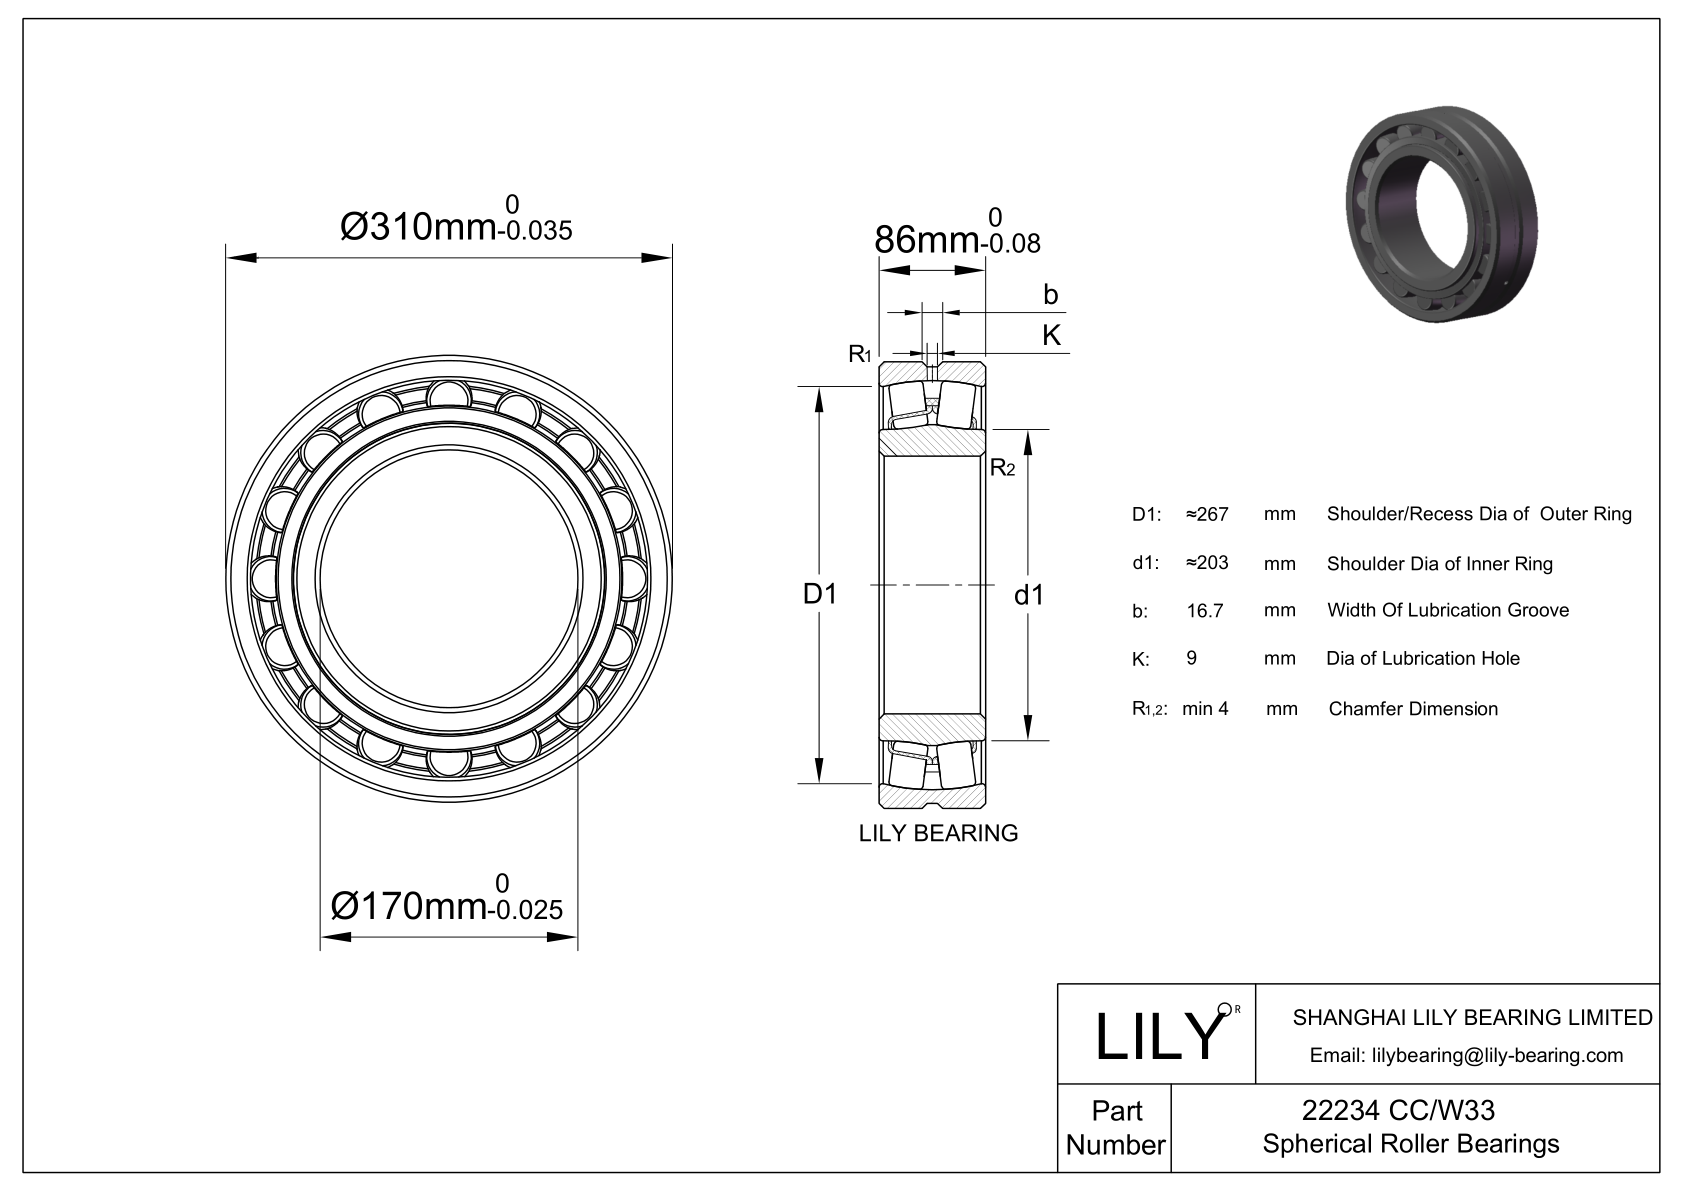 22234 CC/W33 Double Row Spherical Roller Bearing cad drawing